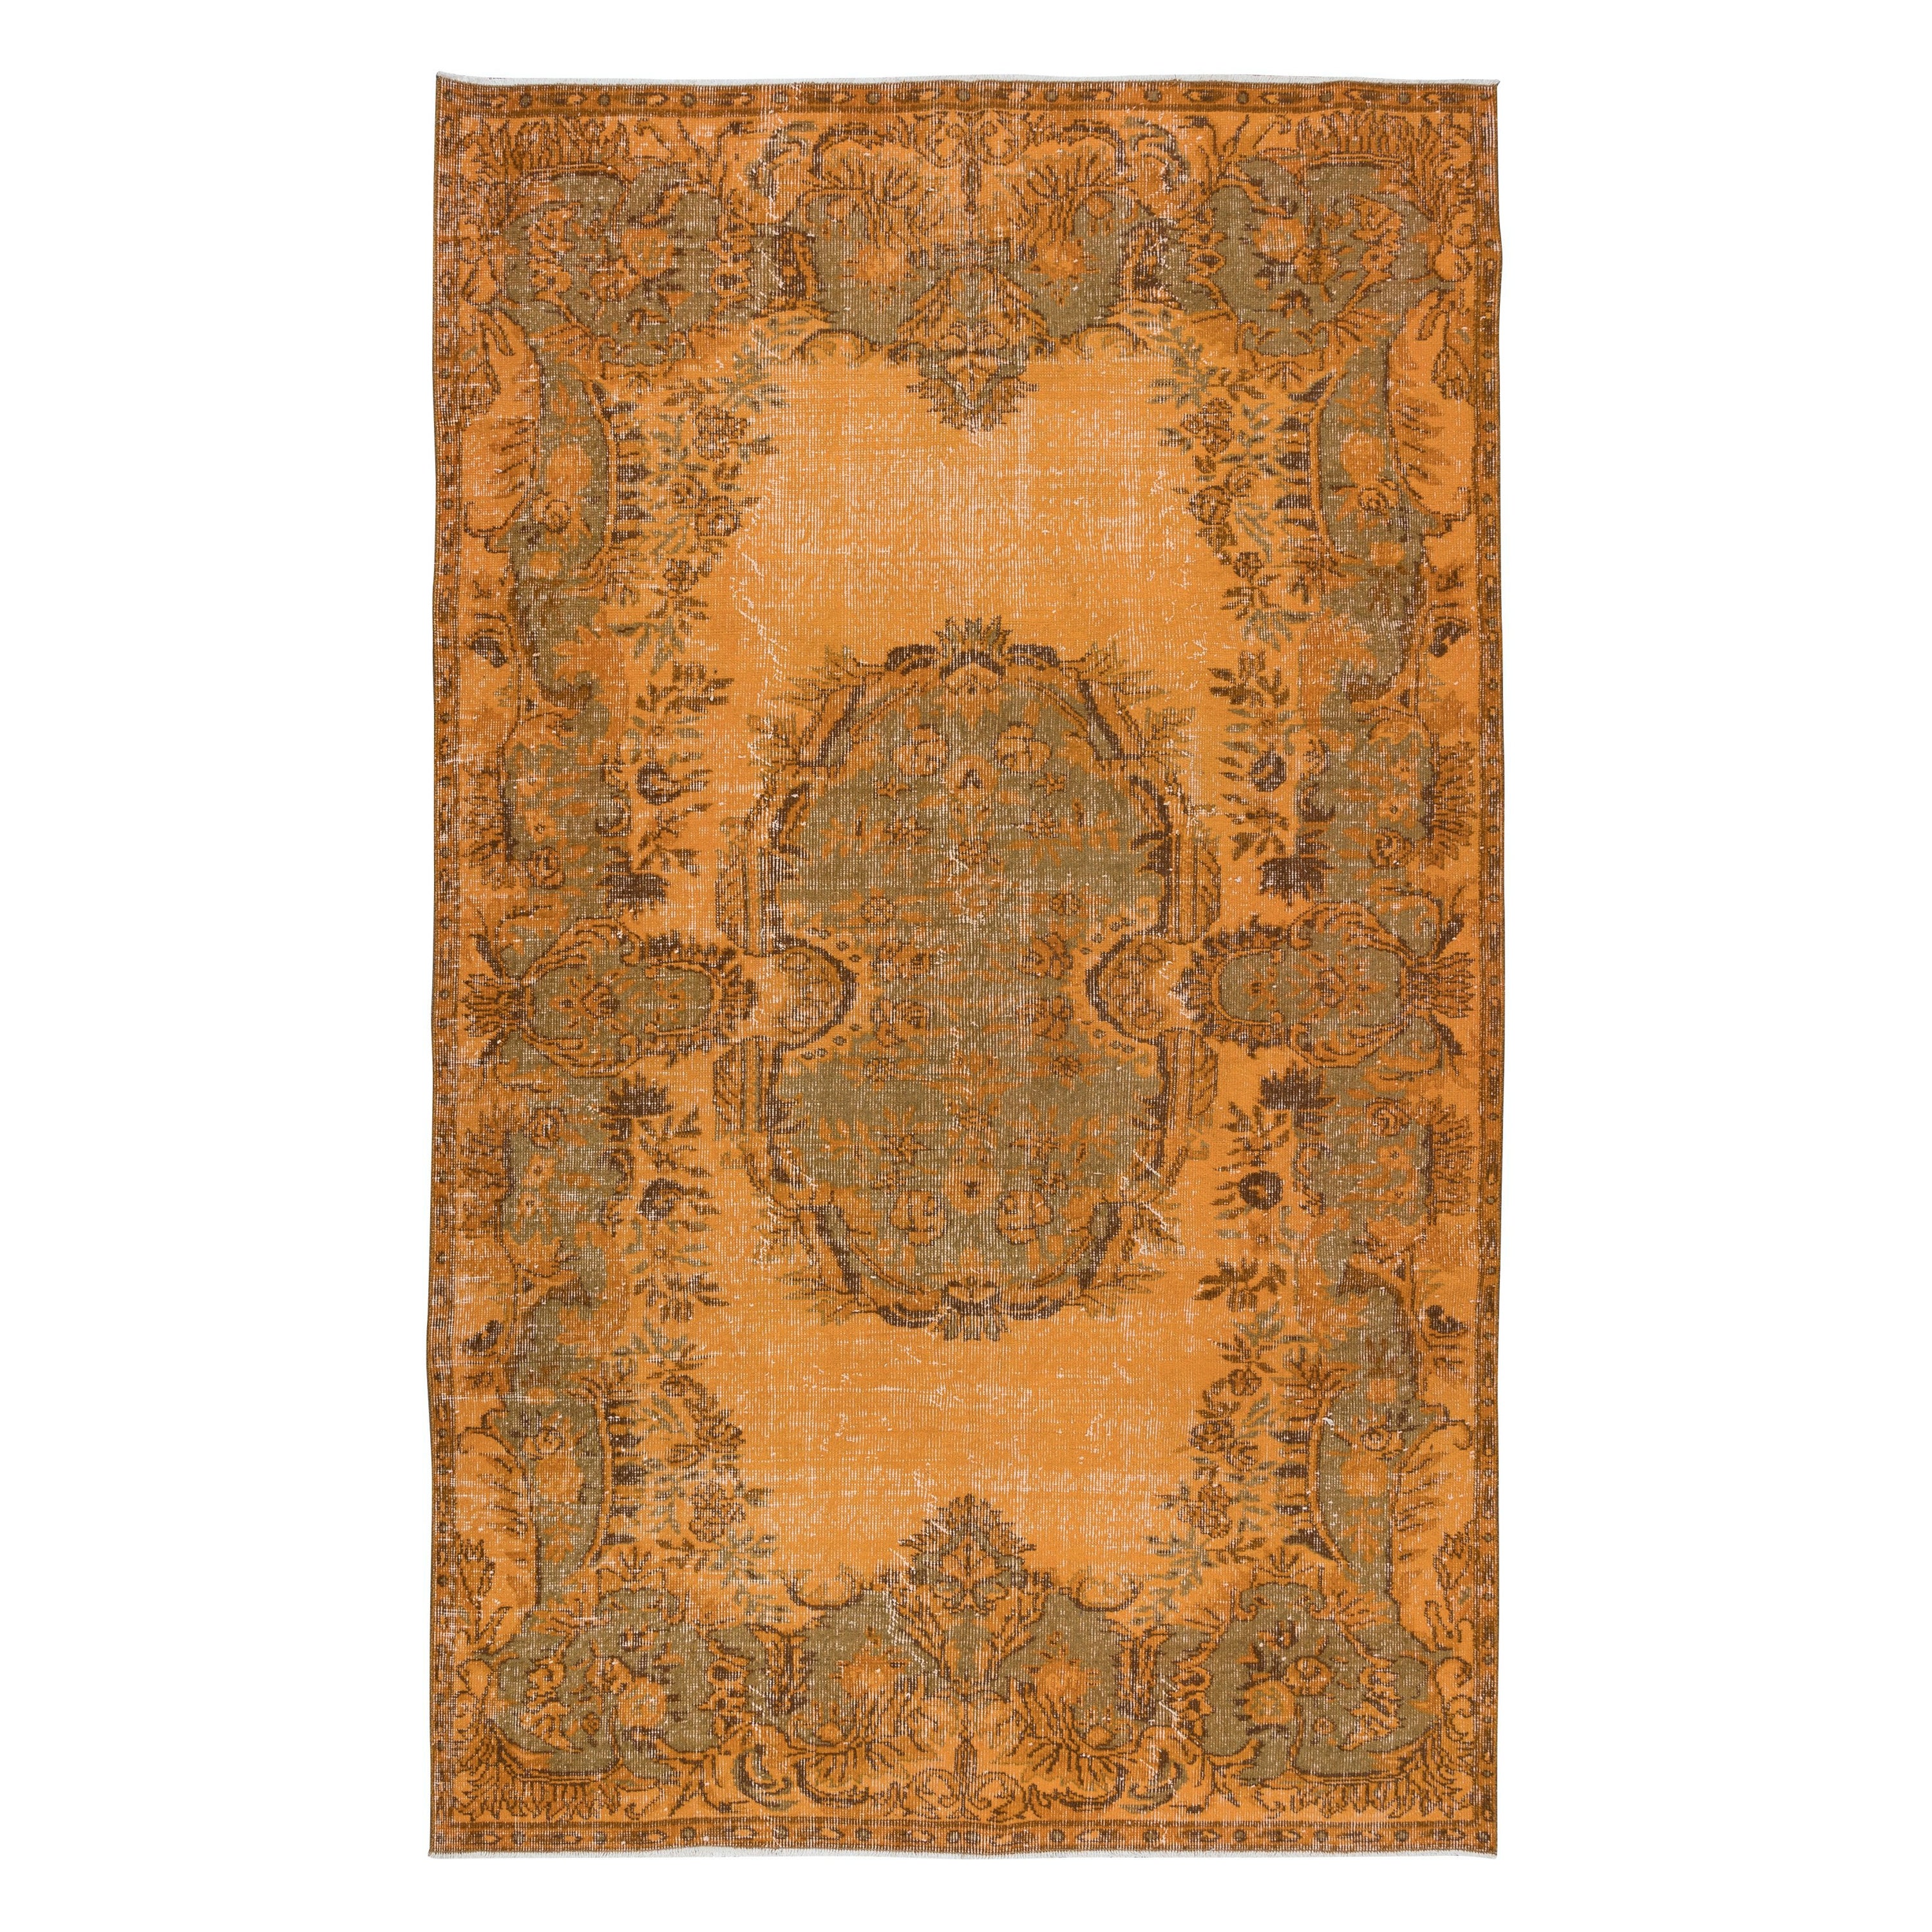 6x9.8 Ft French Aubusson Rug in Orange, Handmade Turkish Carpet For Sale